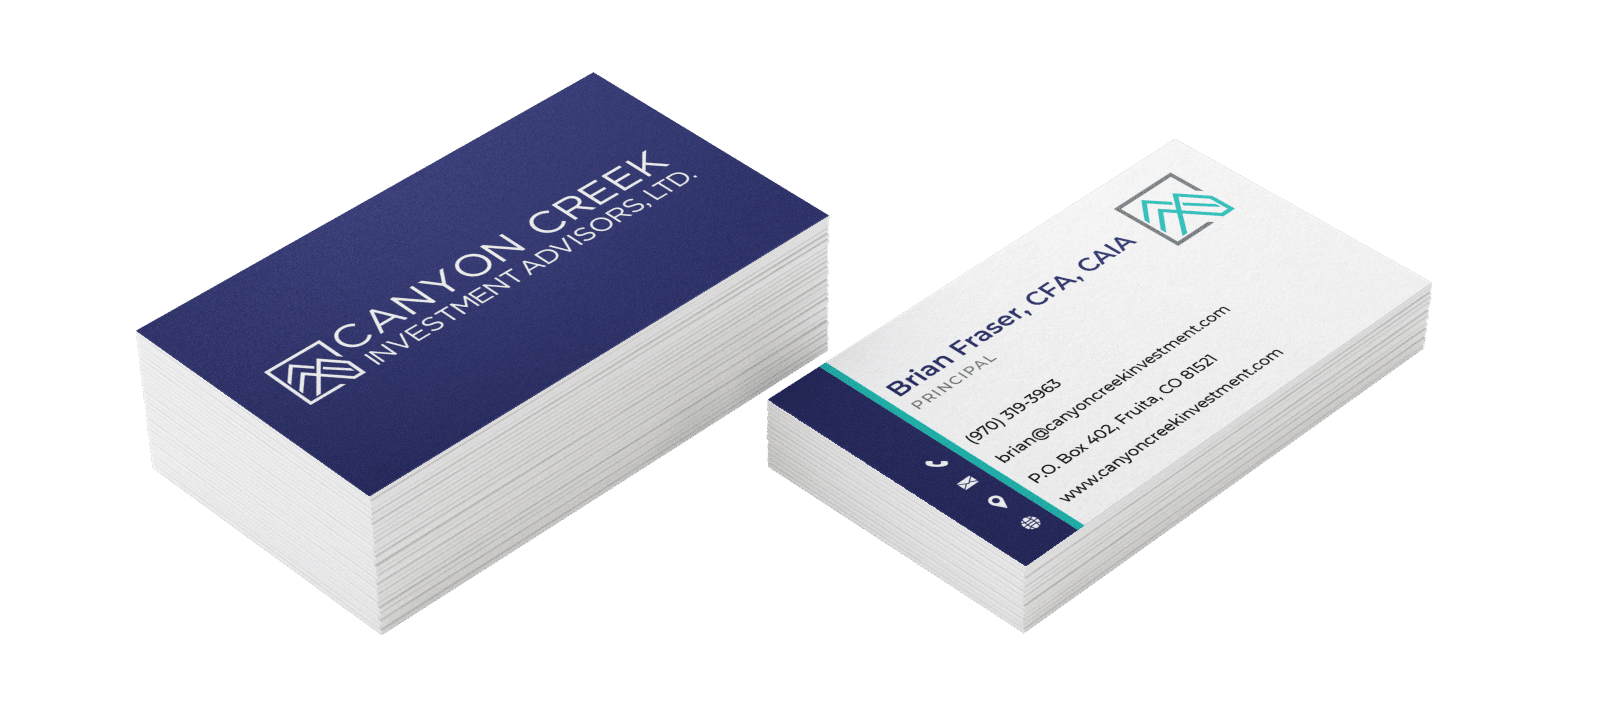 Canyon creek business card design floating mockup - design project by Big Red Jelly